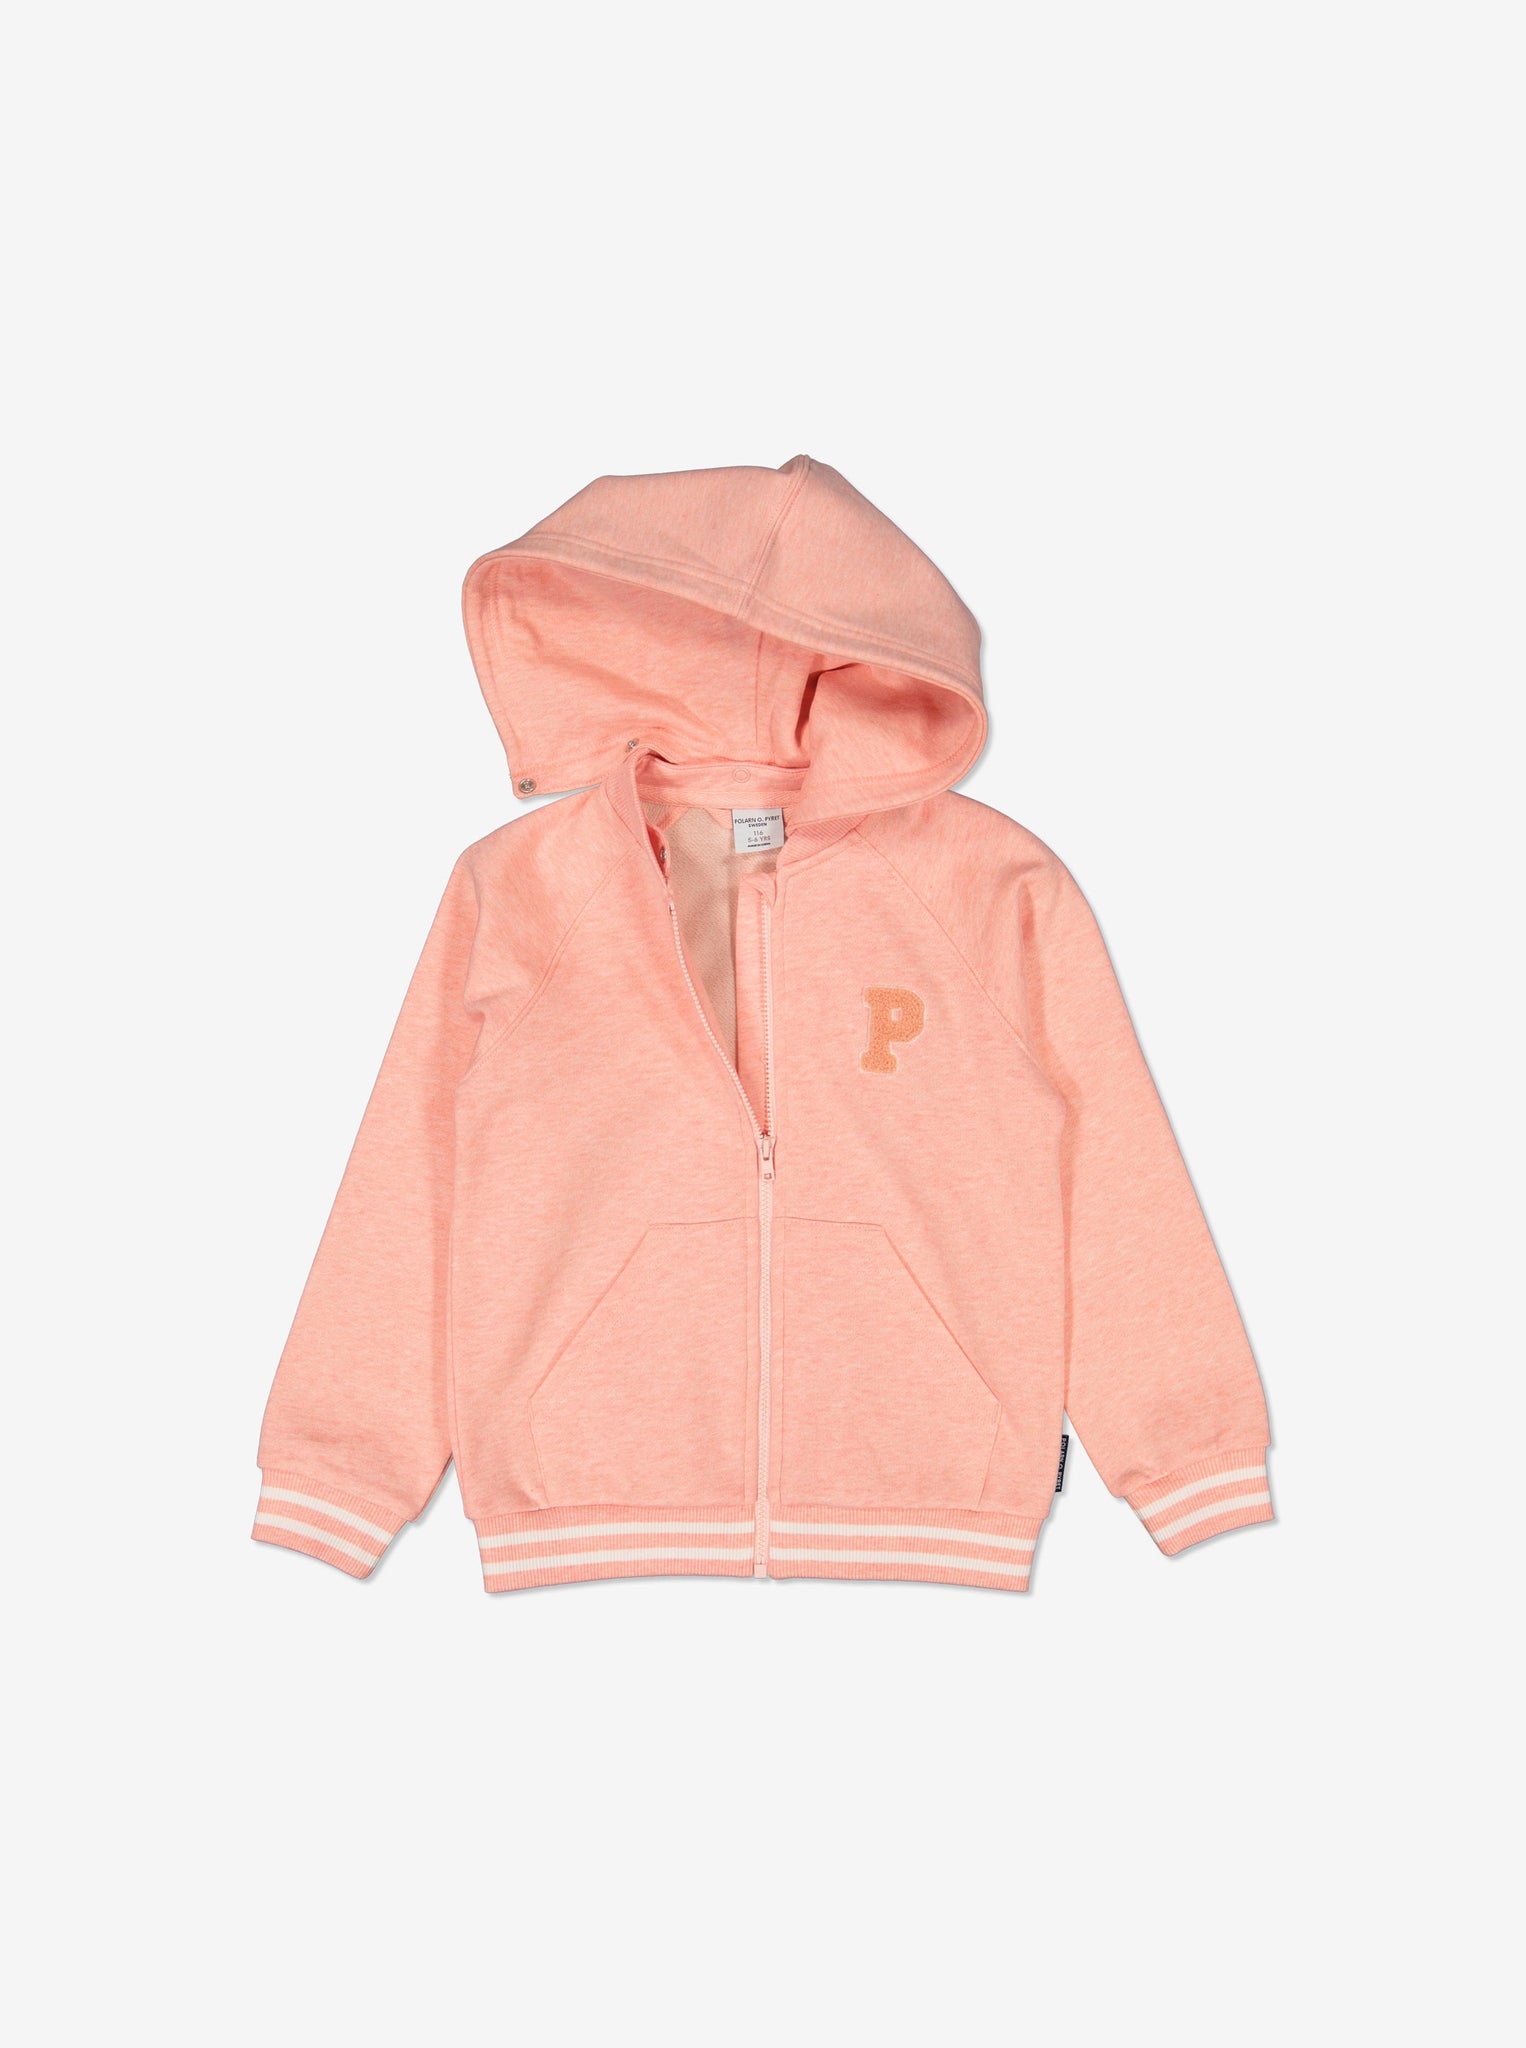 Girls Pink Hoodie from Polarn O. Pyret Kidswear. Made from 100% GOTS Organic Cotton.